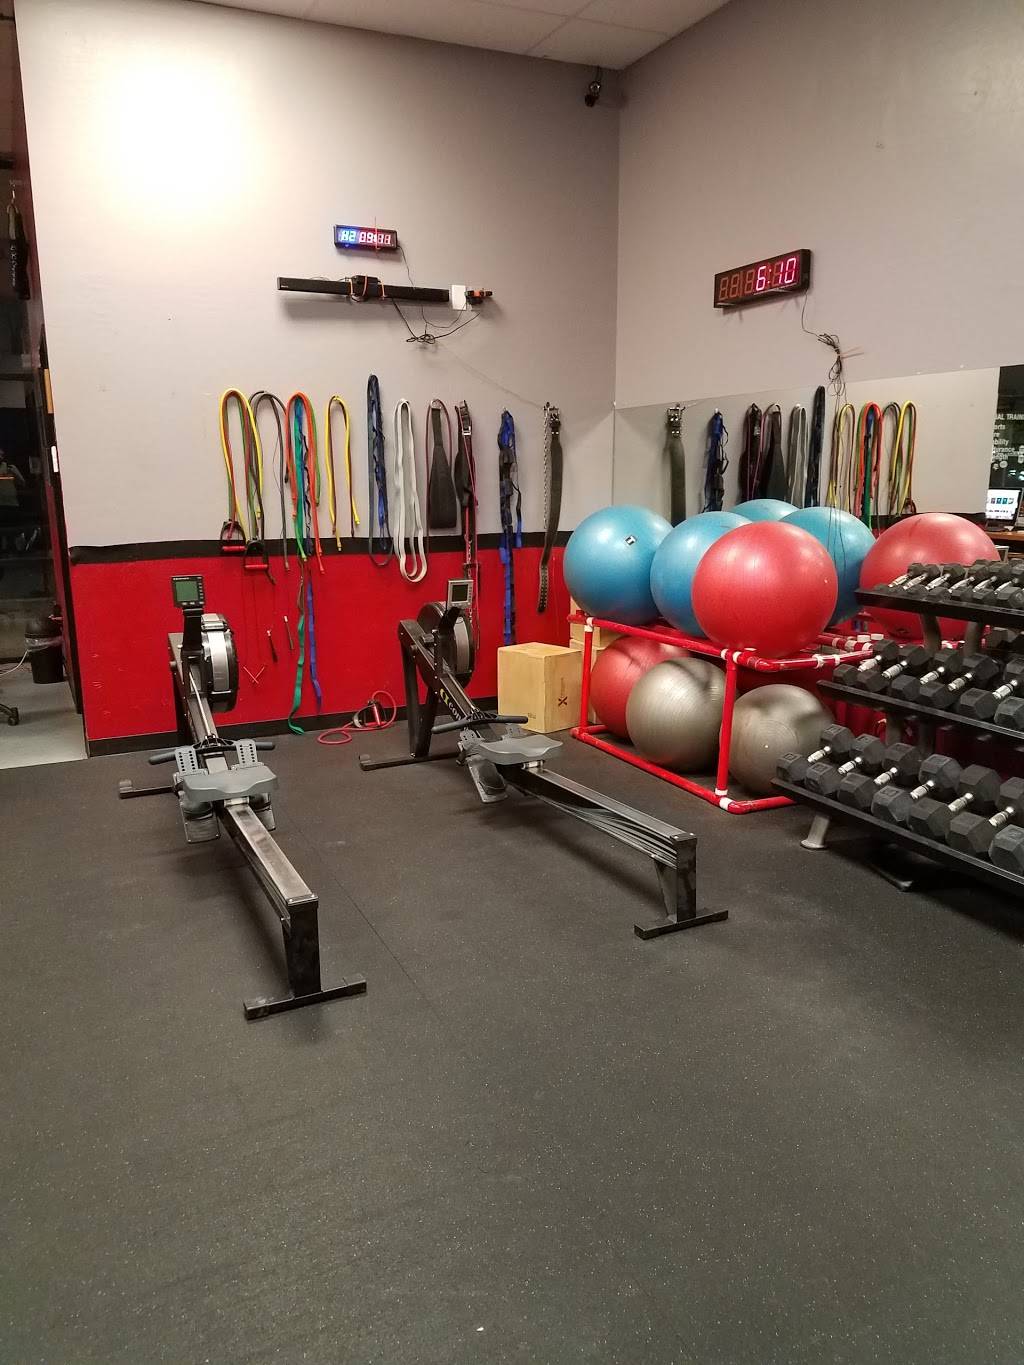 Glendale Strength and Conditioning | 6808 N Dysart Rd #136, Glendale, AZ 85307 | Phone: (602) 561-1300